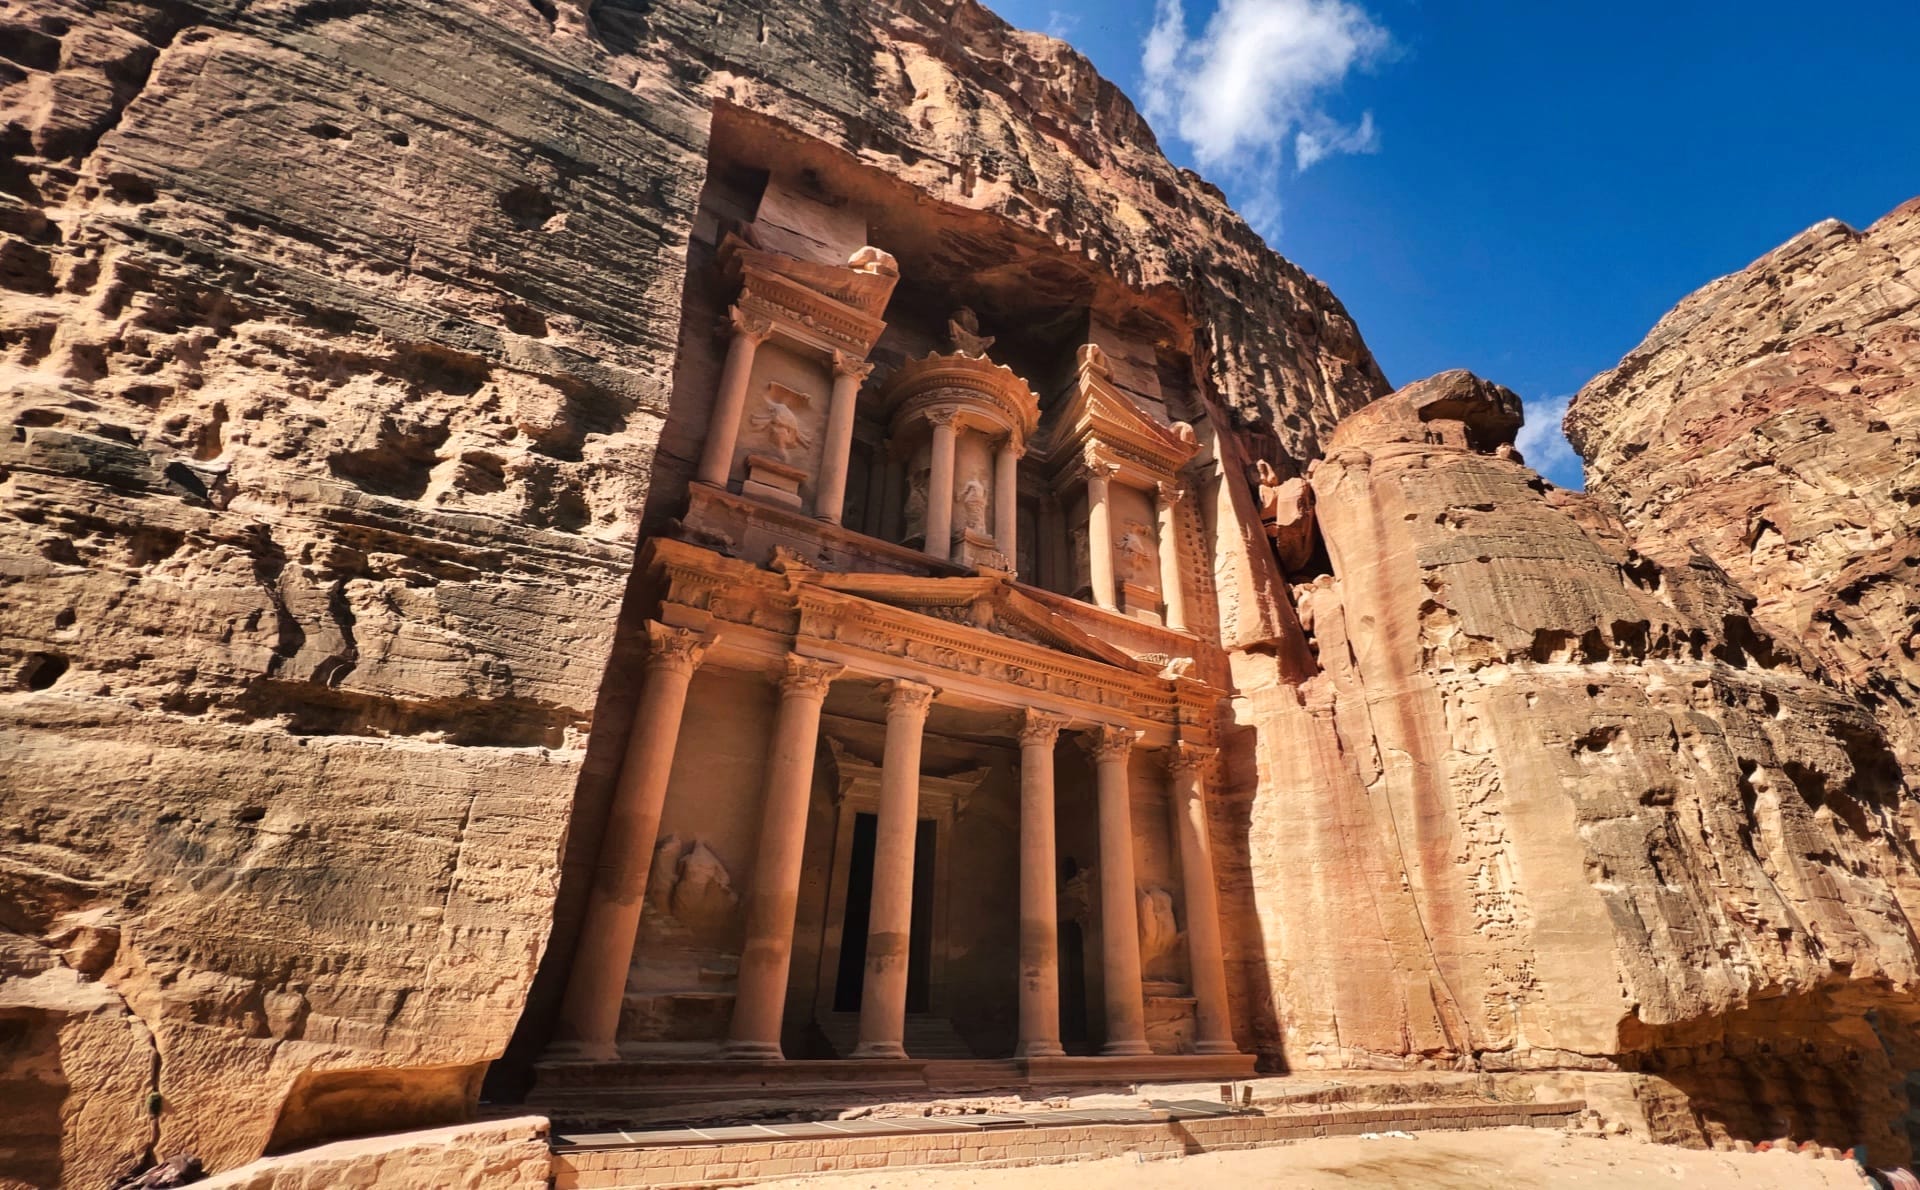 It’s hard to believe Petra still exists, considering that the place is basically water-soluble.